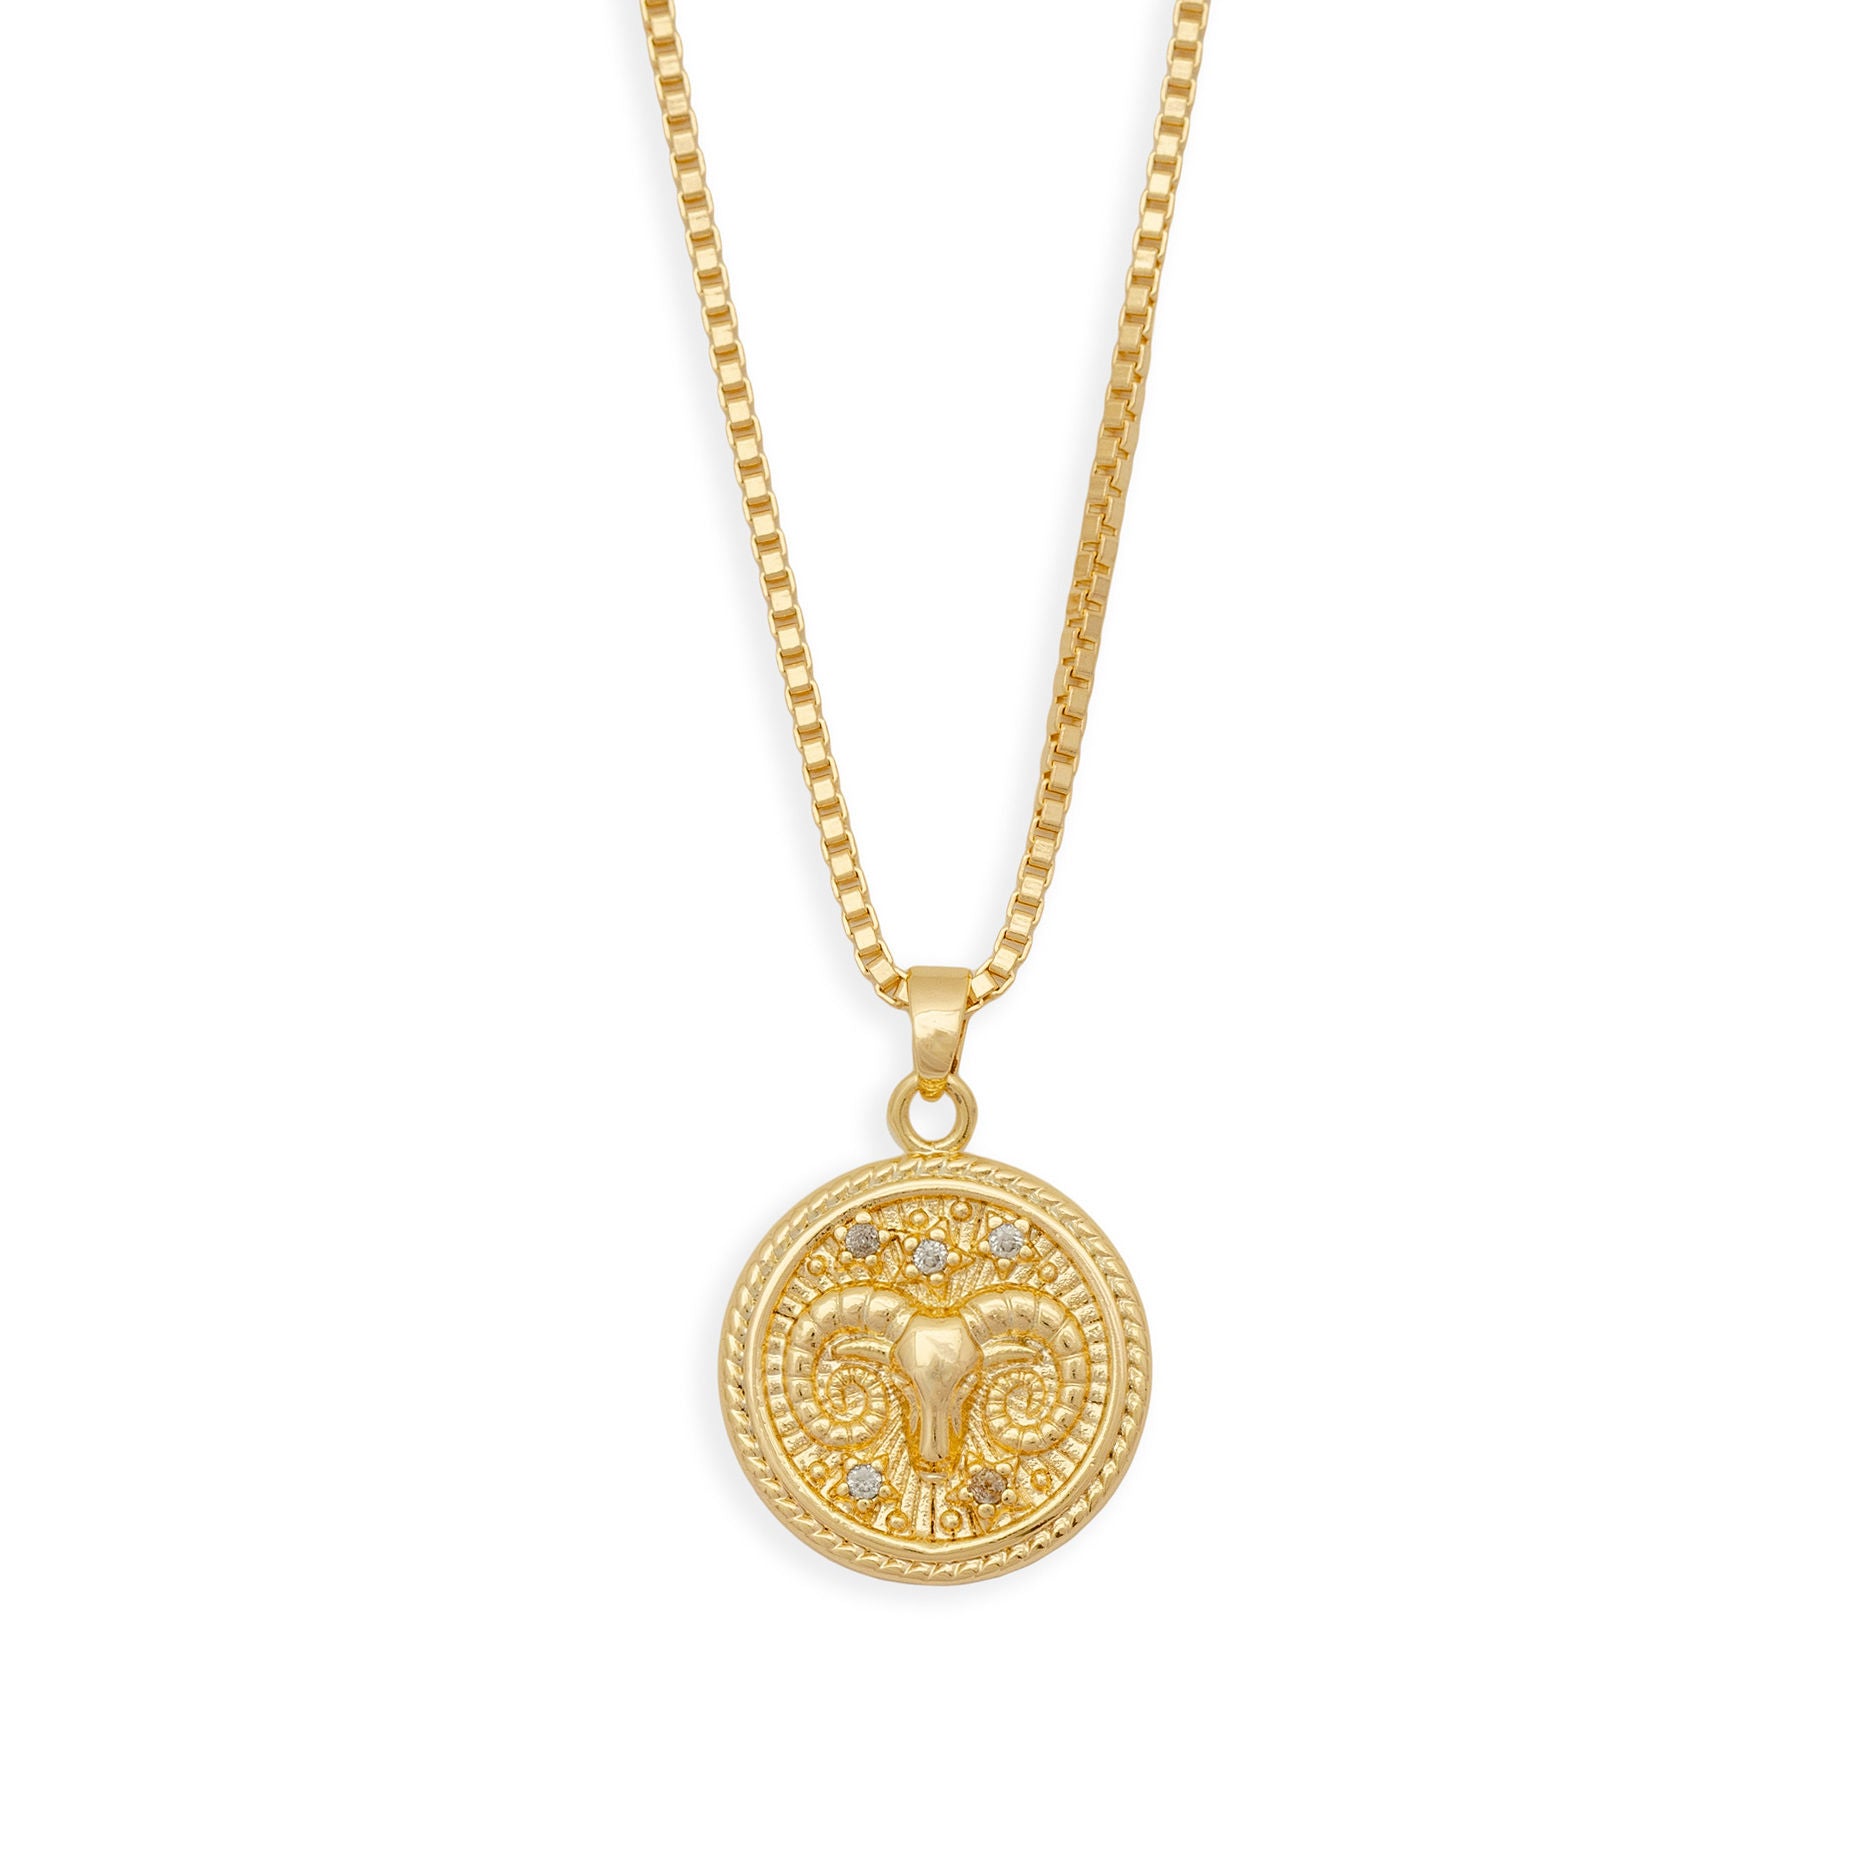 In the Stars Zodiac Necklace - Aries from Erin Fader Jewelry